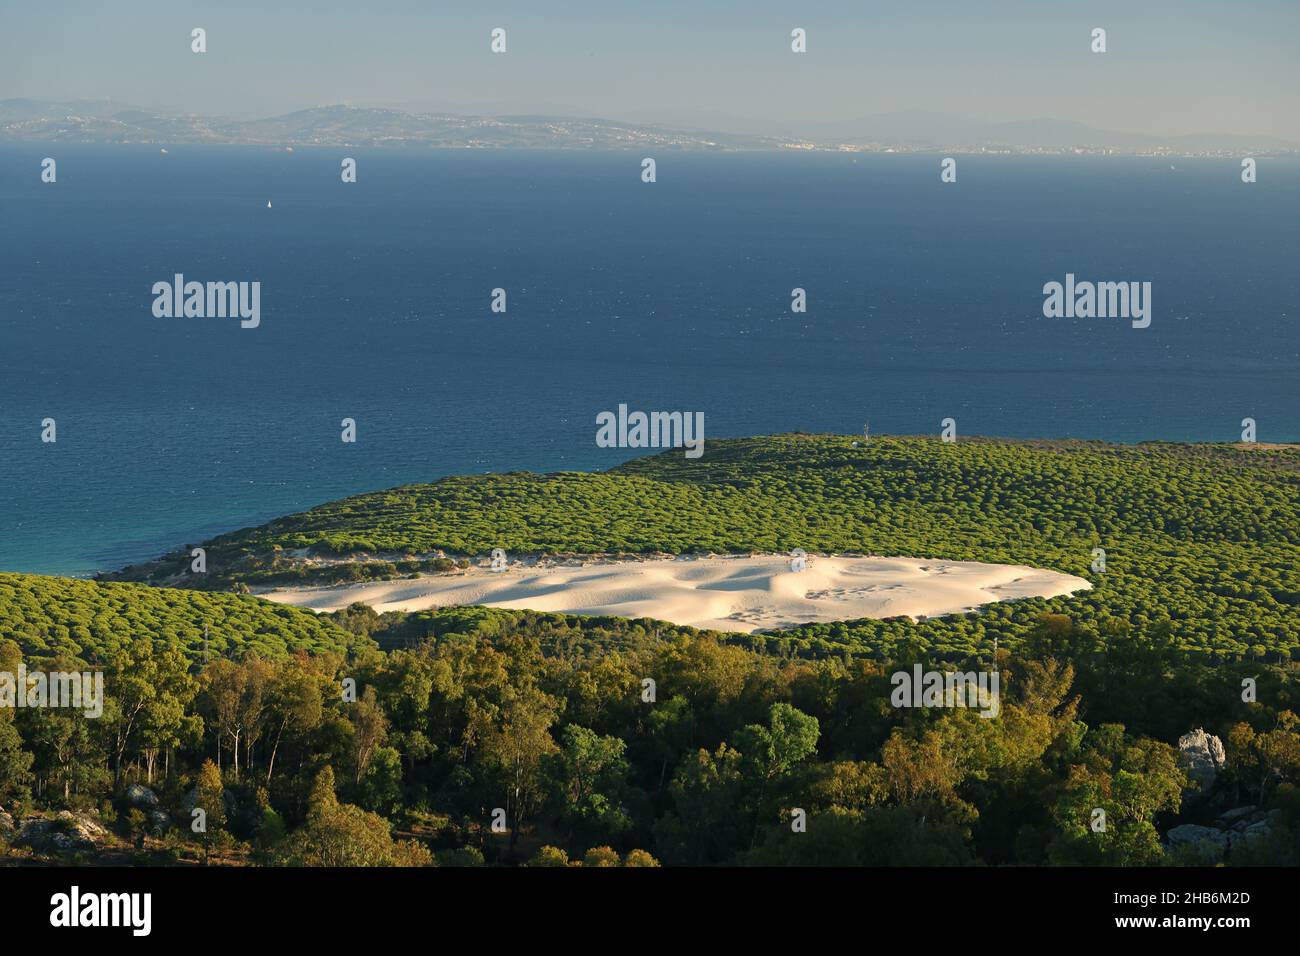 shifting sand dune of Bolonia in a stand of pine trees, aerial view, Spain, Andalusia, Tarifa, Naturmonument Bolonia Stock Photo